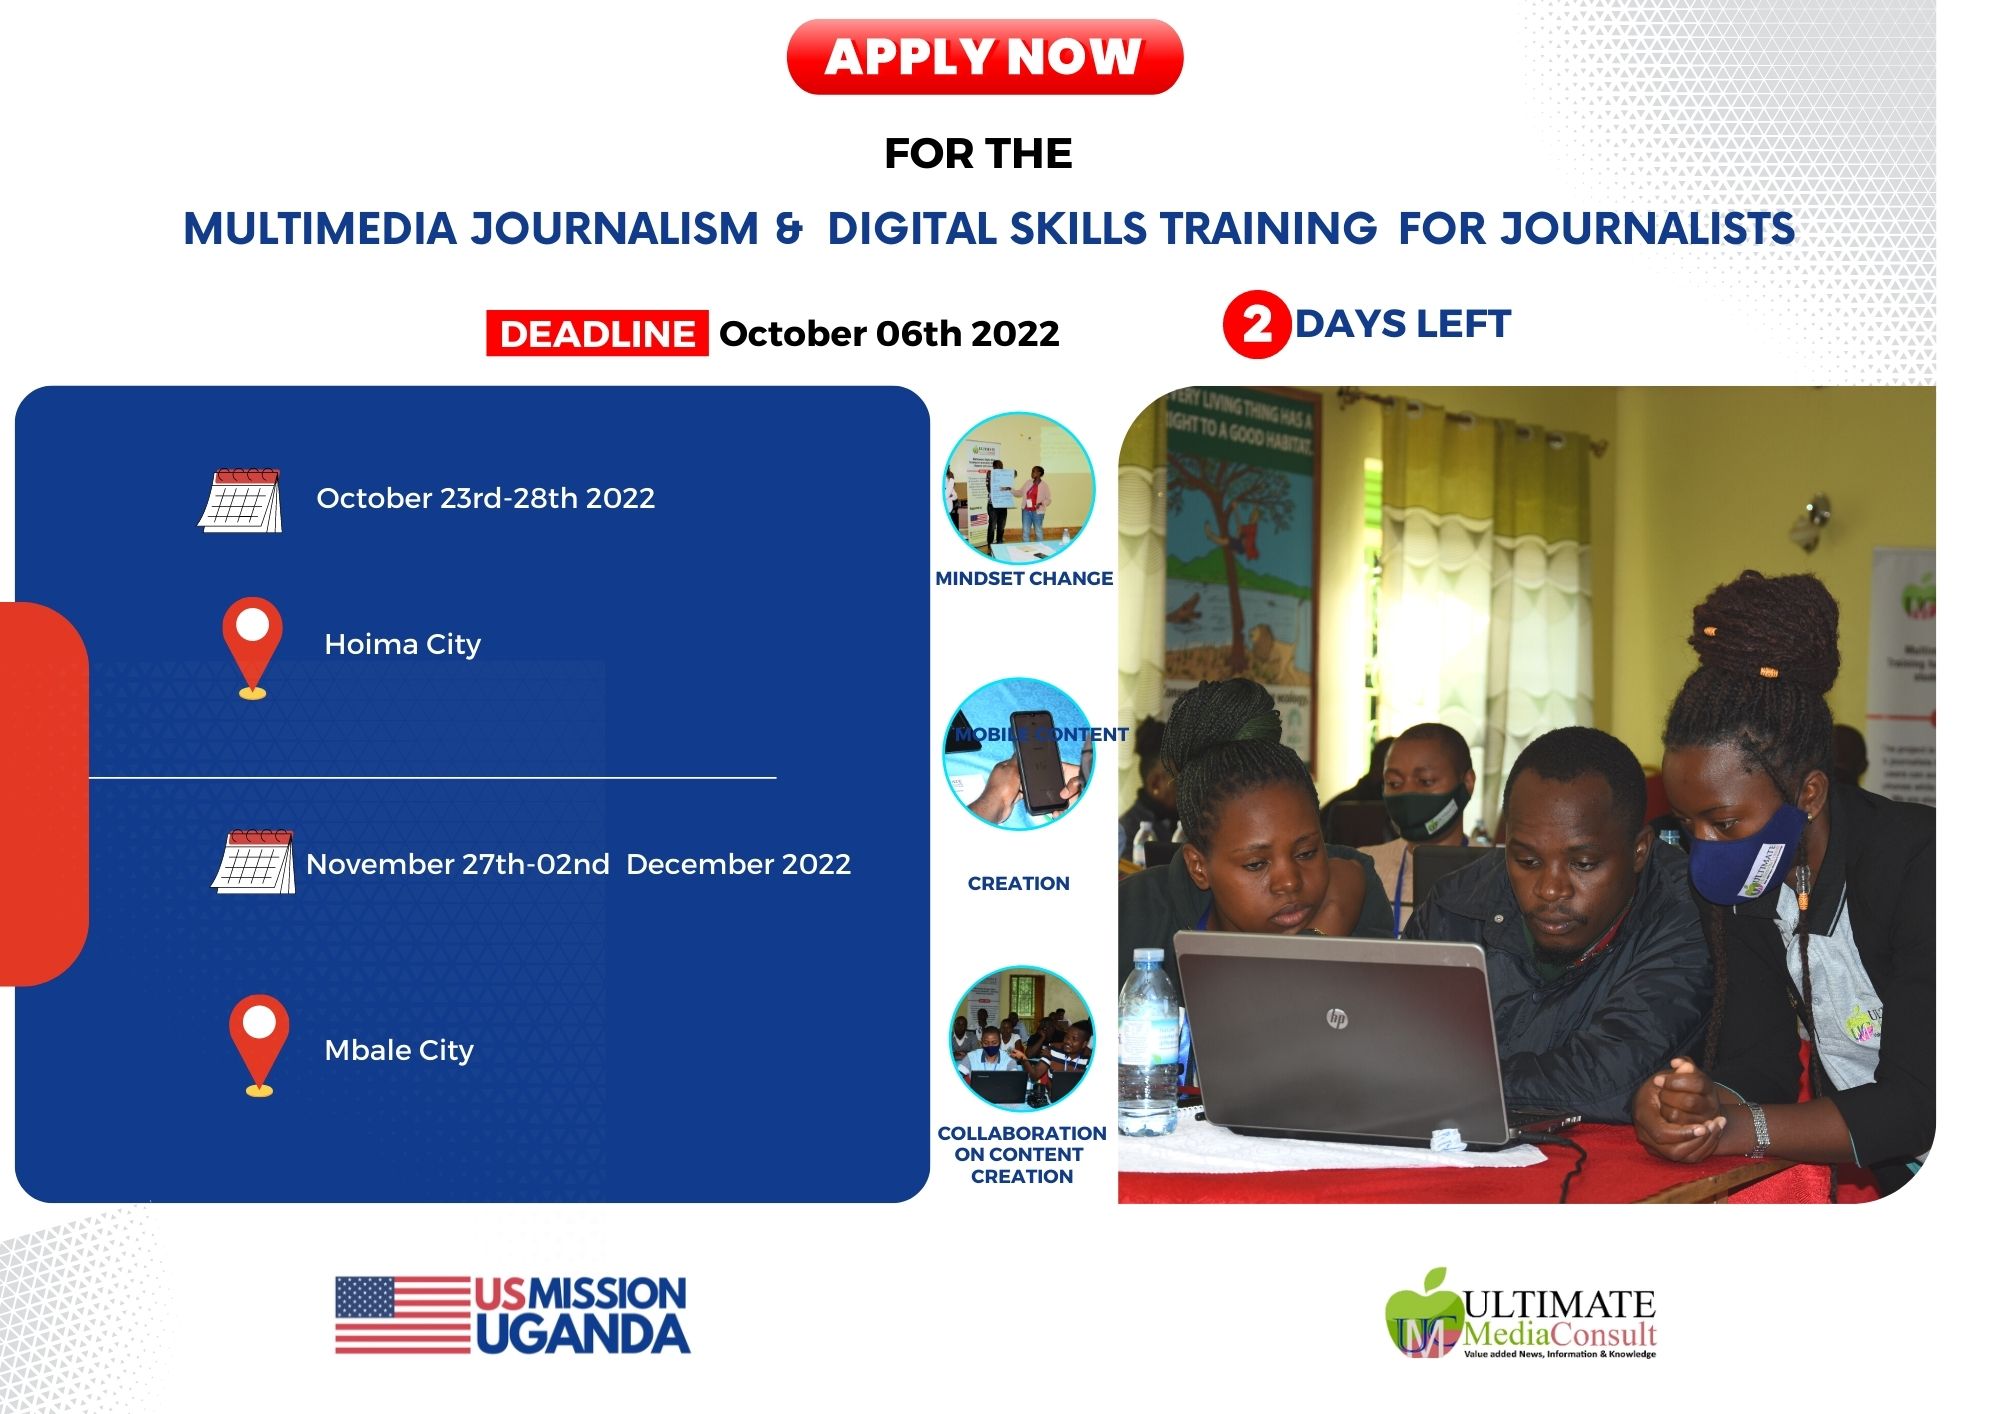 Applications Invited For Journalists To Be Trained In Multimedia Journalism and Digital Skills. 3